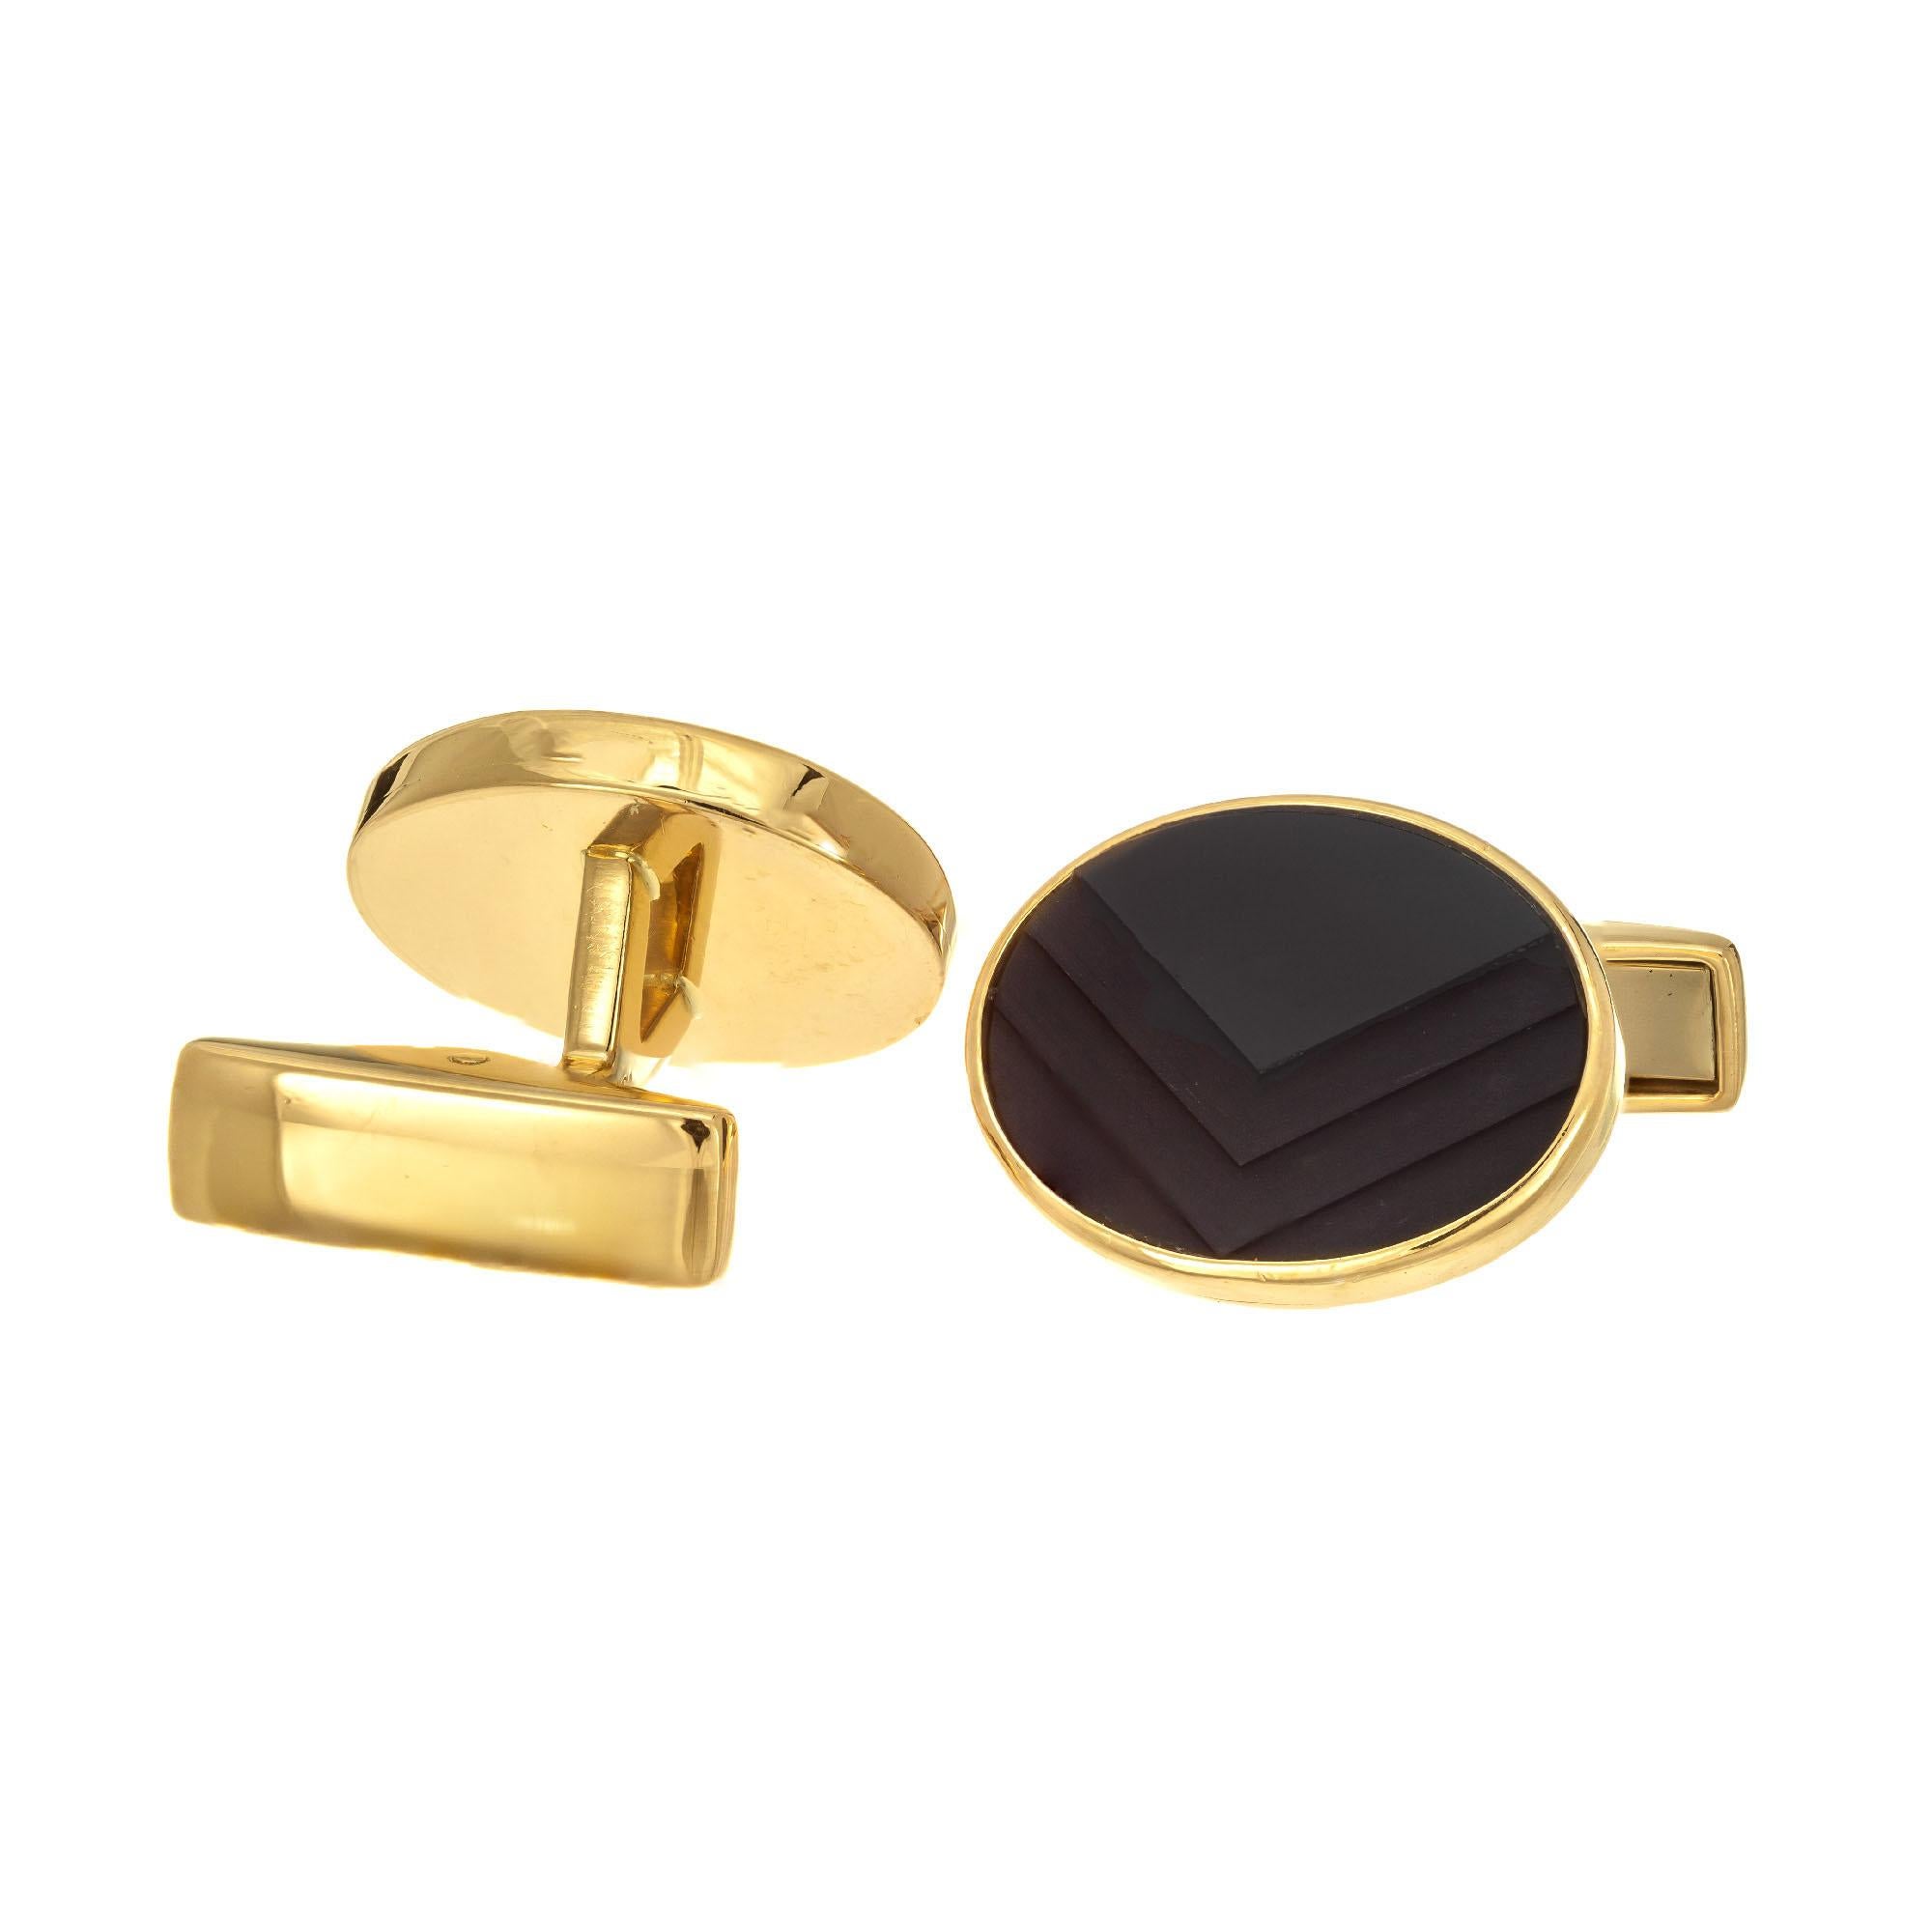 German carved chevron design textured 18k yellow gold cufflinks.

2 oval black chevron cut onyx
18k yellow gold 
Stamped: 18k Germany
13.8 grams 
Top to bottom: 14.5mm or 9/16 Inch
Width: 17.9mm or 5/8 Inch
Depth or thickness: 3.46mm
